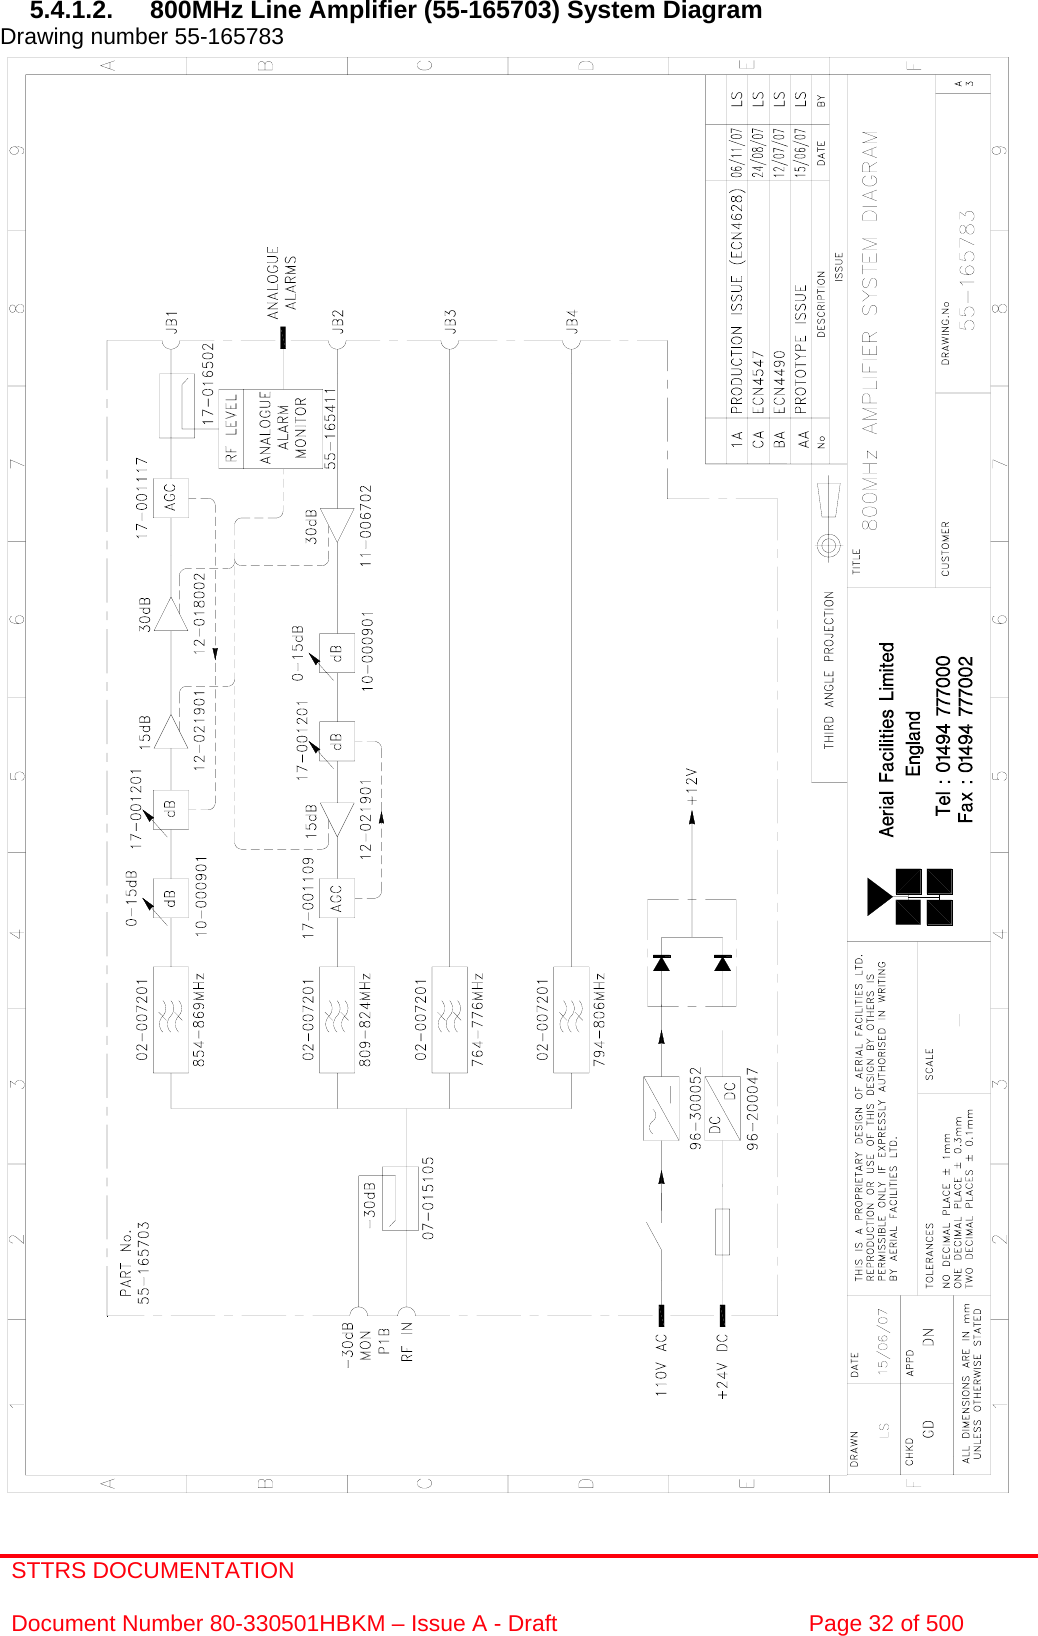 STTRS DOCUMENTATION  Document Number 80-330501HBKM – Issue A - Draft  Page 32 of 500   5.4.1.2.  800MHz Line Amplifier (55-165703) System Diagram  Drawing number 55-165783                                                        